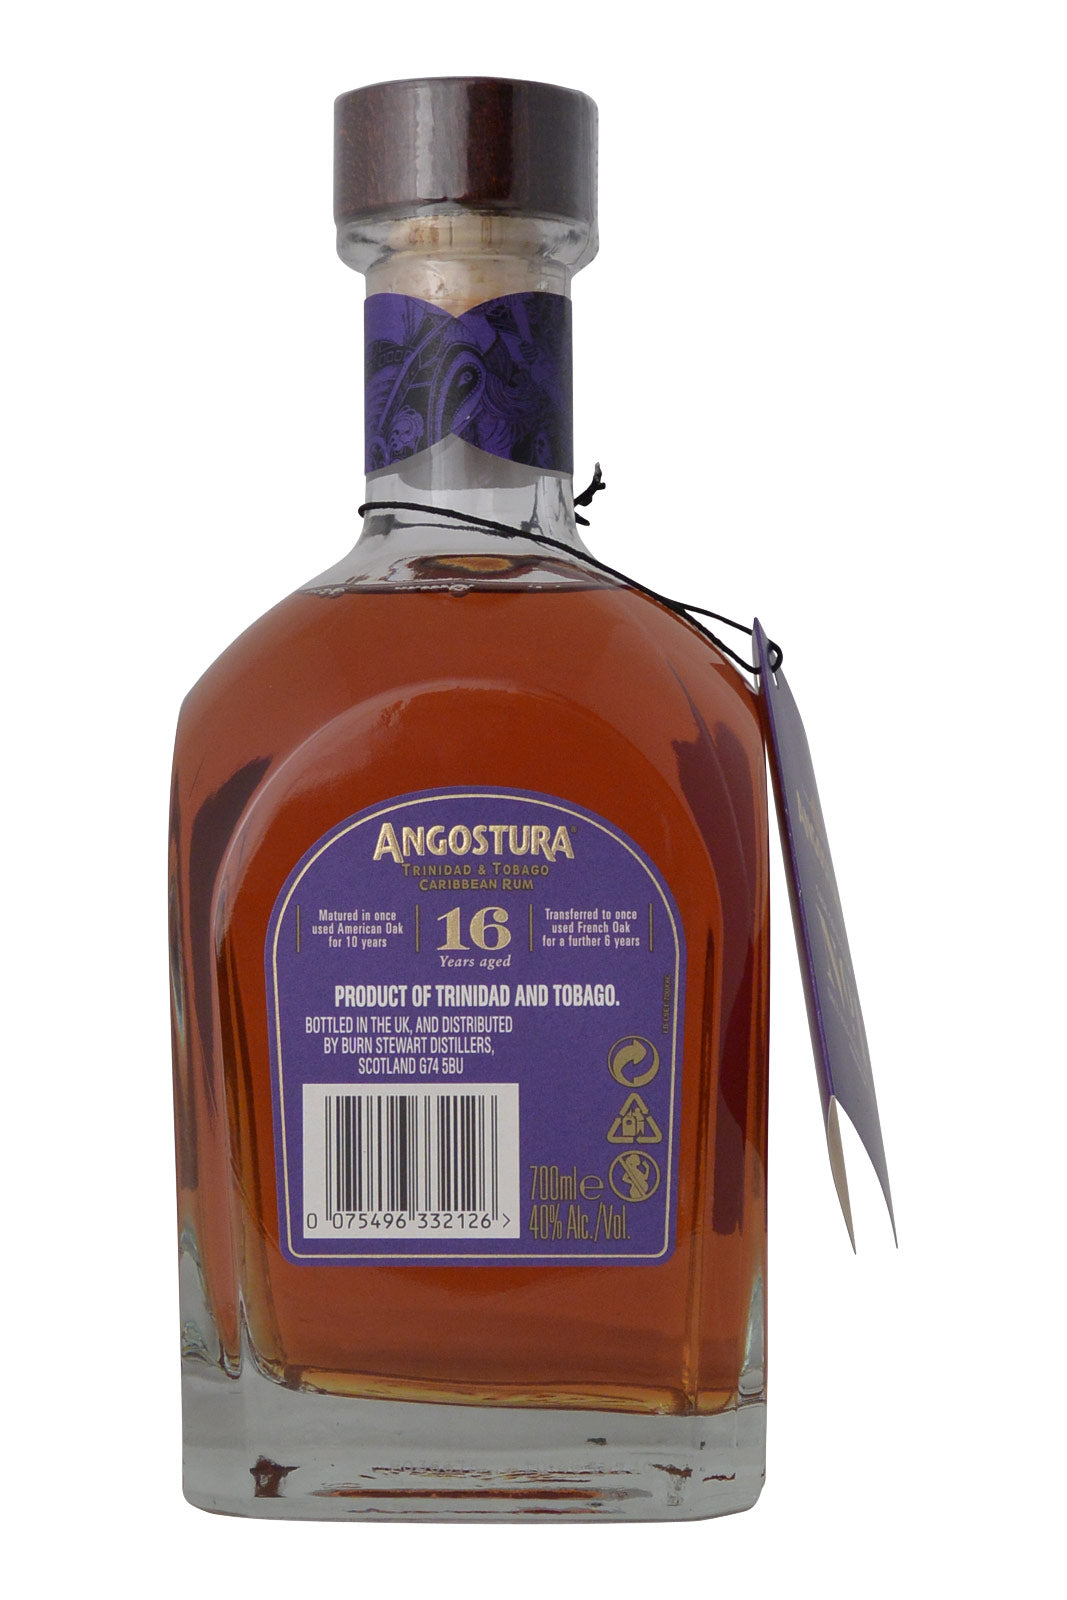 Angostura Rhum N°1 Cask Collection - Limited Edition 2015